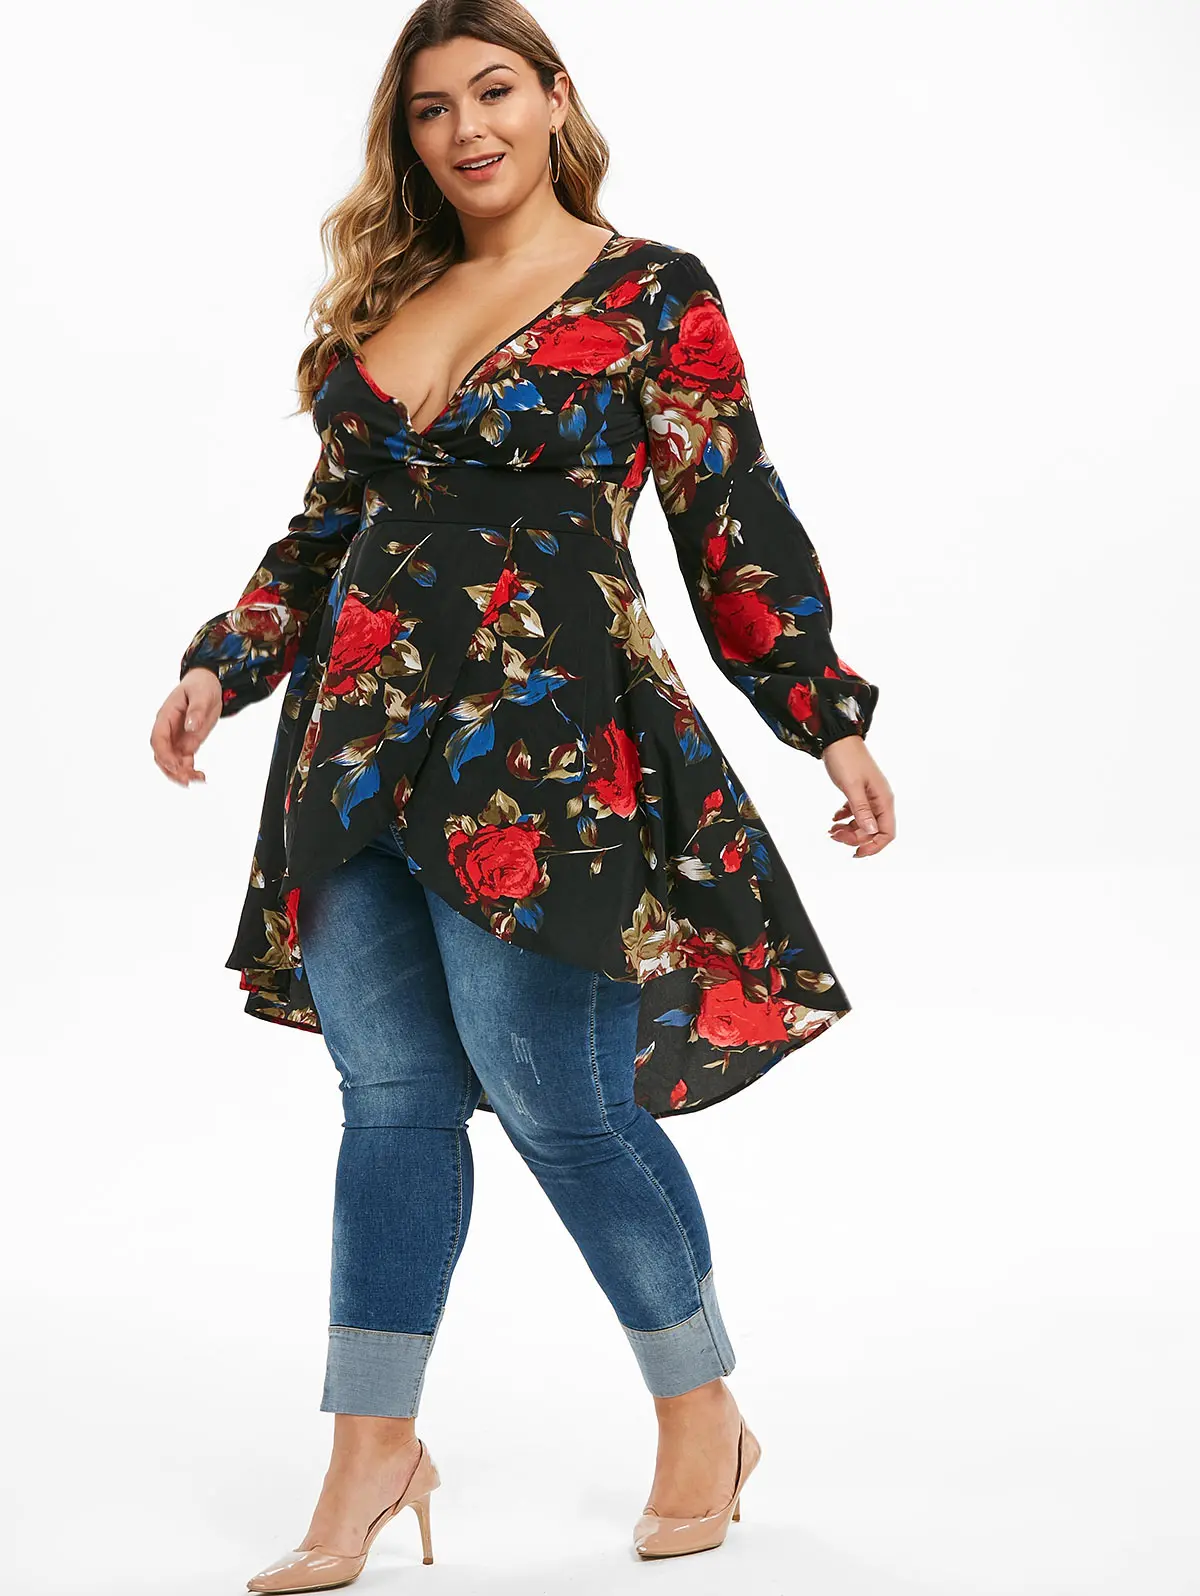 

ROSEGAL Large Size Flower Print Top Asymmetric Long Sleeve Blouse Plunging Neck Women Sexy High Waist Vintage Long Tunic Shirts